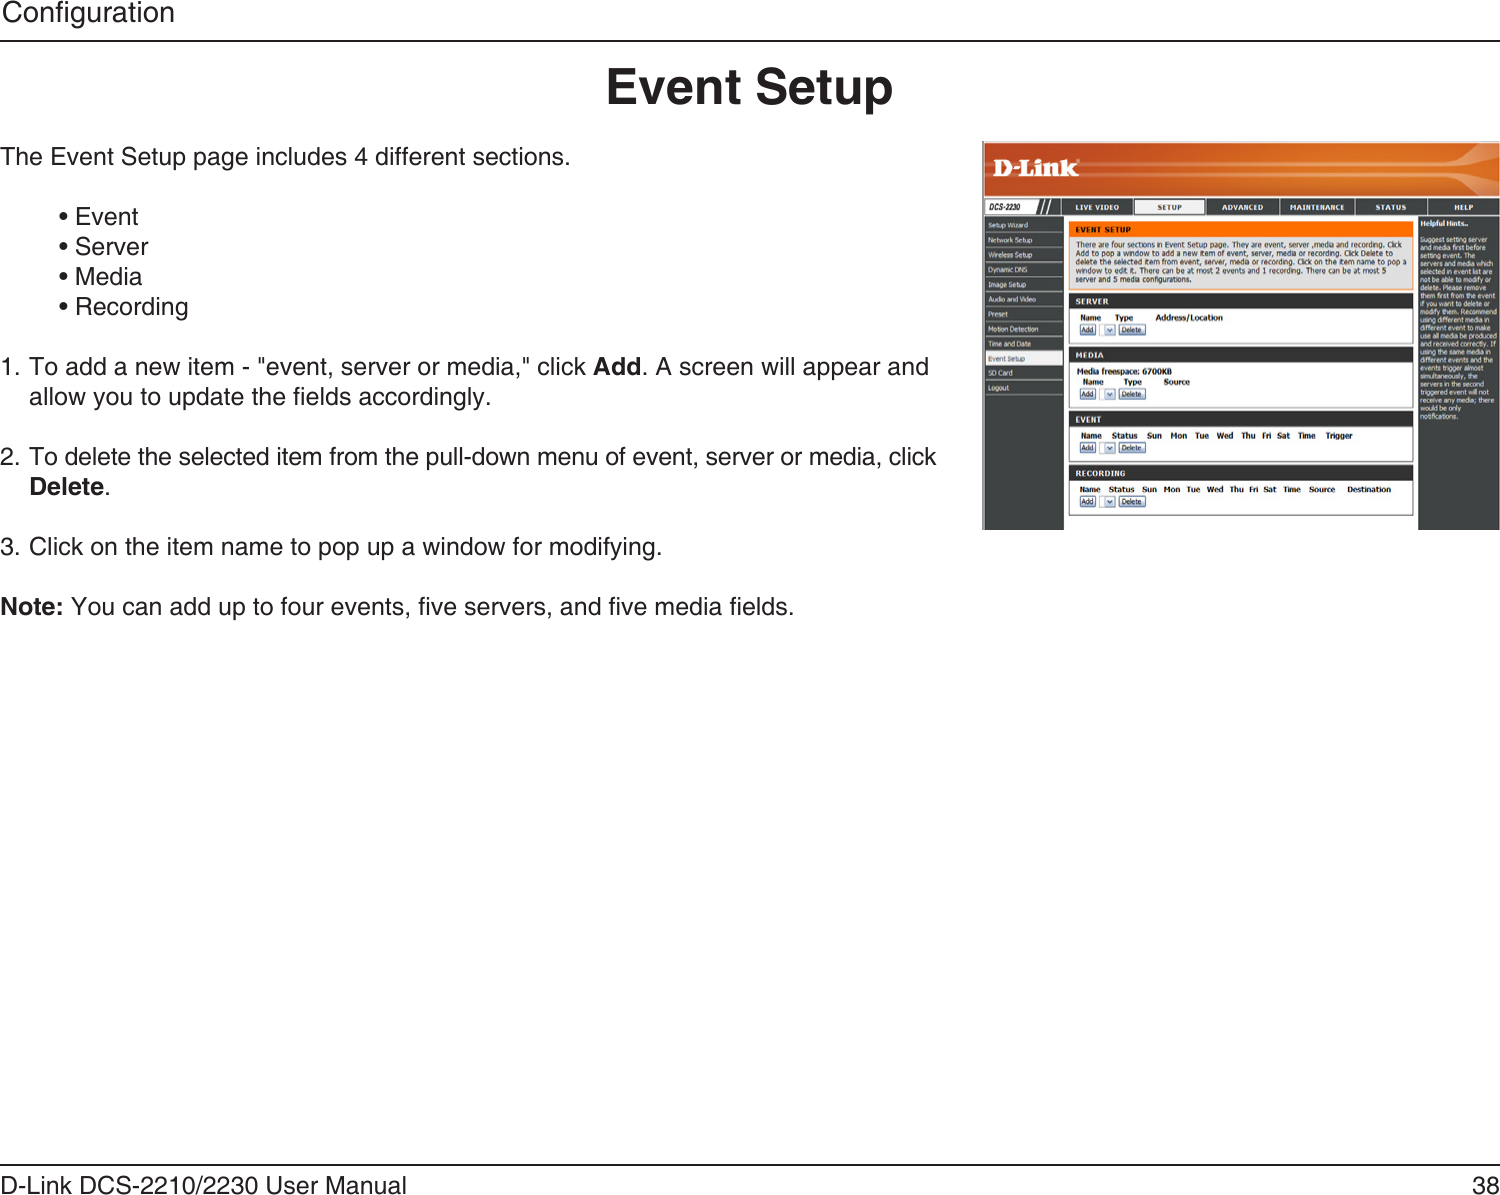 38D-Link DCS-2210/2230 User ManualCongurationEvent SetupThe Event Setup page includes 4 different sections.• Event• Server • Media• Recording1. To add a new item - &quot;event, server or media,&quot; click Add. A screen will appear and allow you to update the elds accordingly.2. To delete the selected item from the pull-down menu of event, server or media, click Delete. 3. Click on the item name to pop up a window for modifying.Note: You can add up to four events, ve servers, and ve media elds.